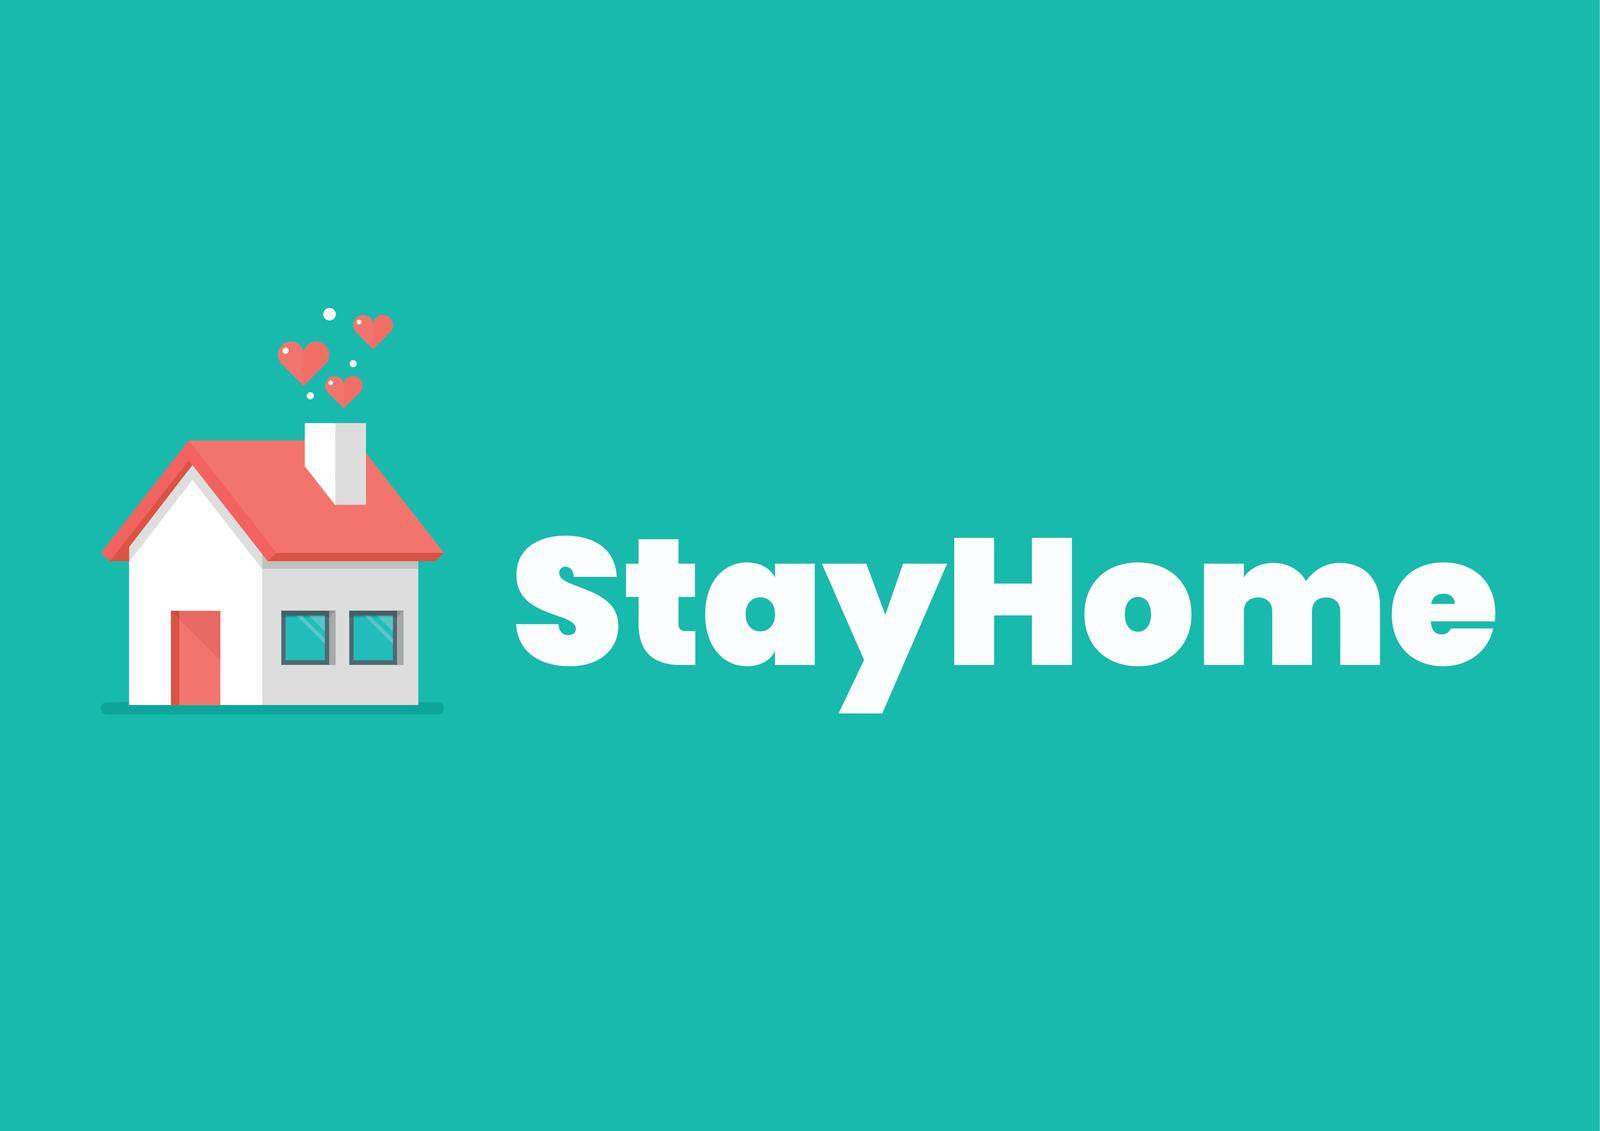 Stay at home slogan with house icon by siraanamwong